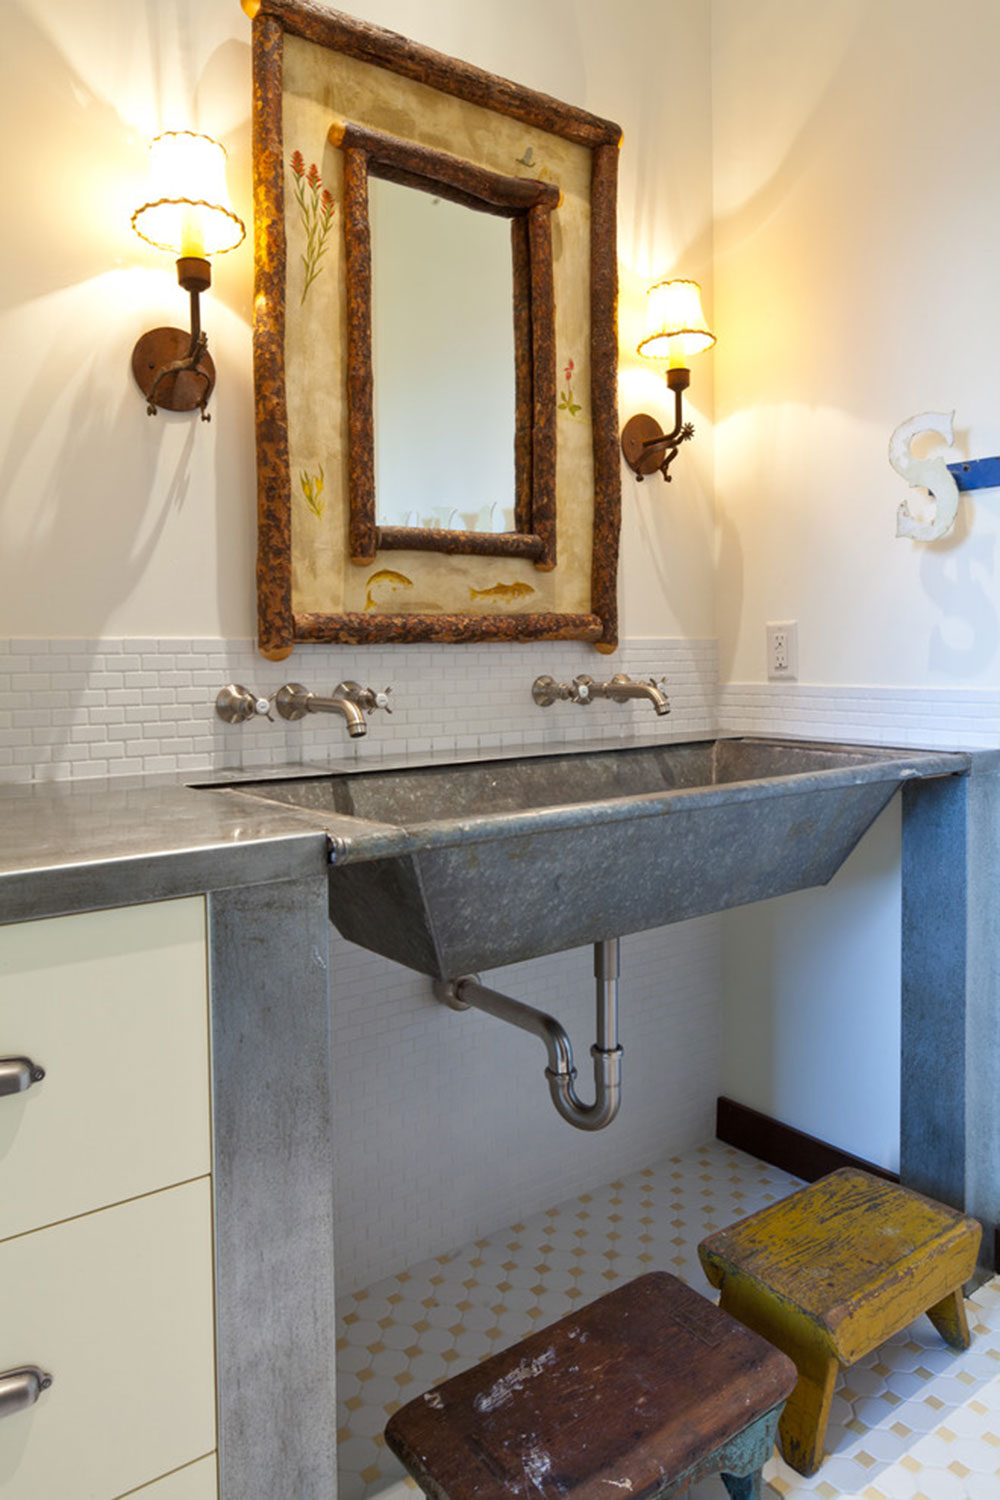 Dairy-Ranch-Remodel-by-Teton-Heritage-Builders Small bathroom remodel tips to do it properly